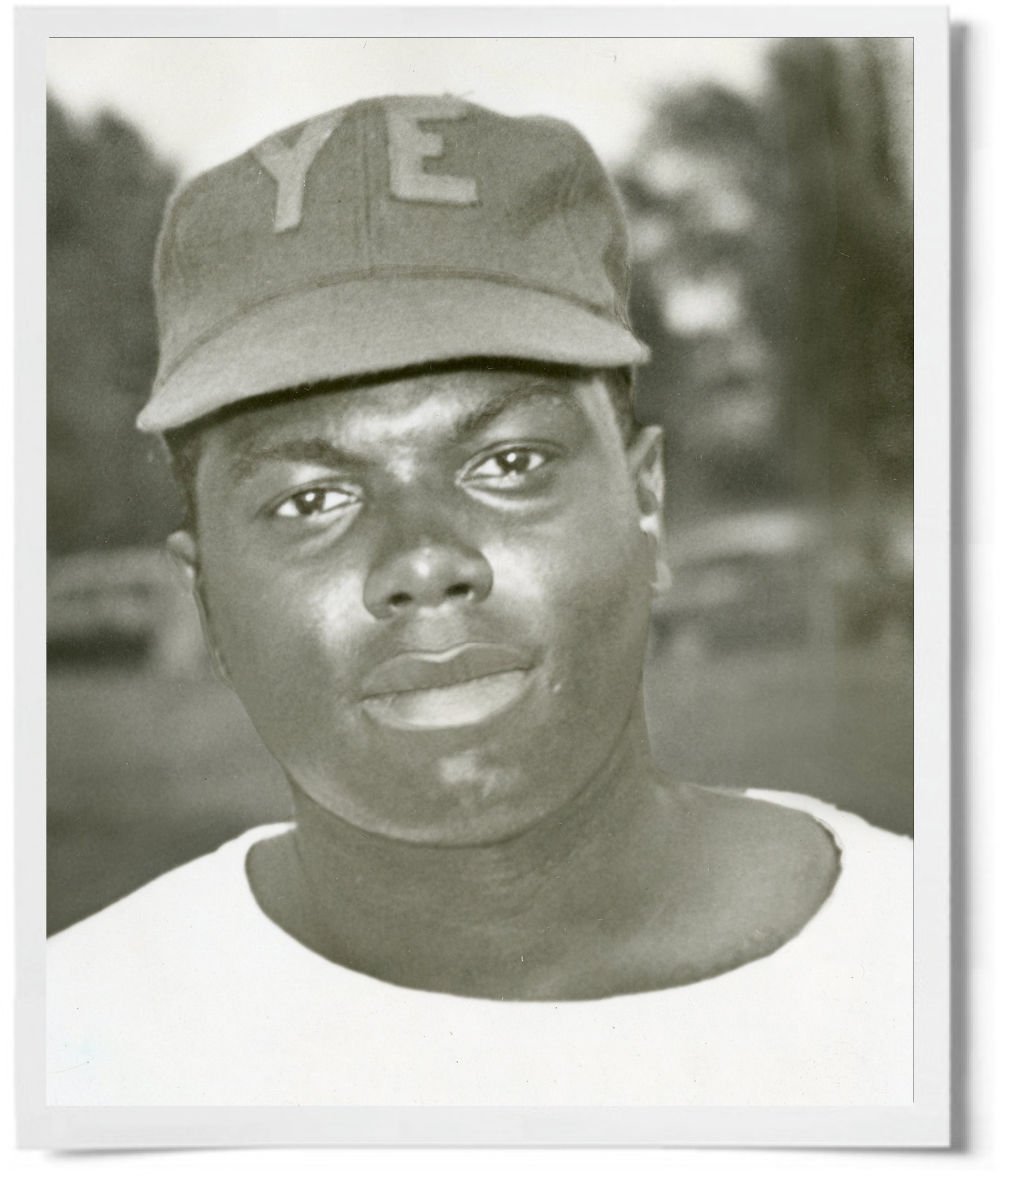 Back in the day, Nov. 9, 1935: North Omaha native and Hall of Fame pitcher  Bob Gibson was born